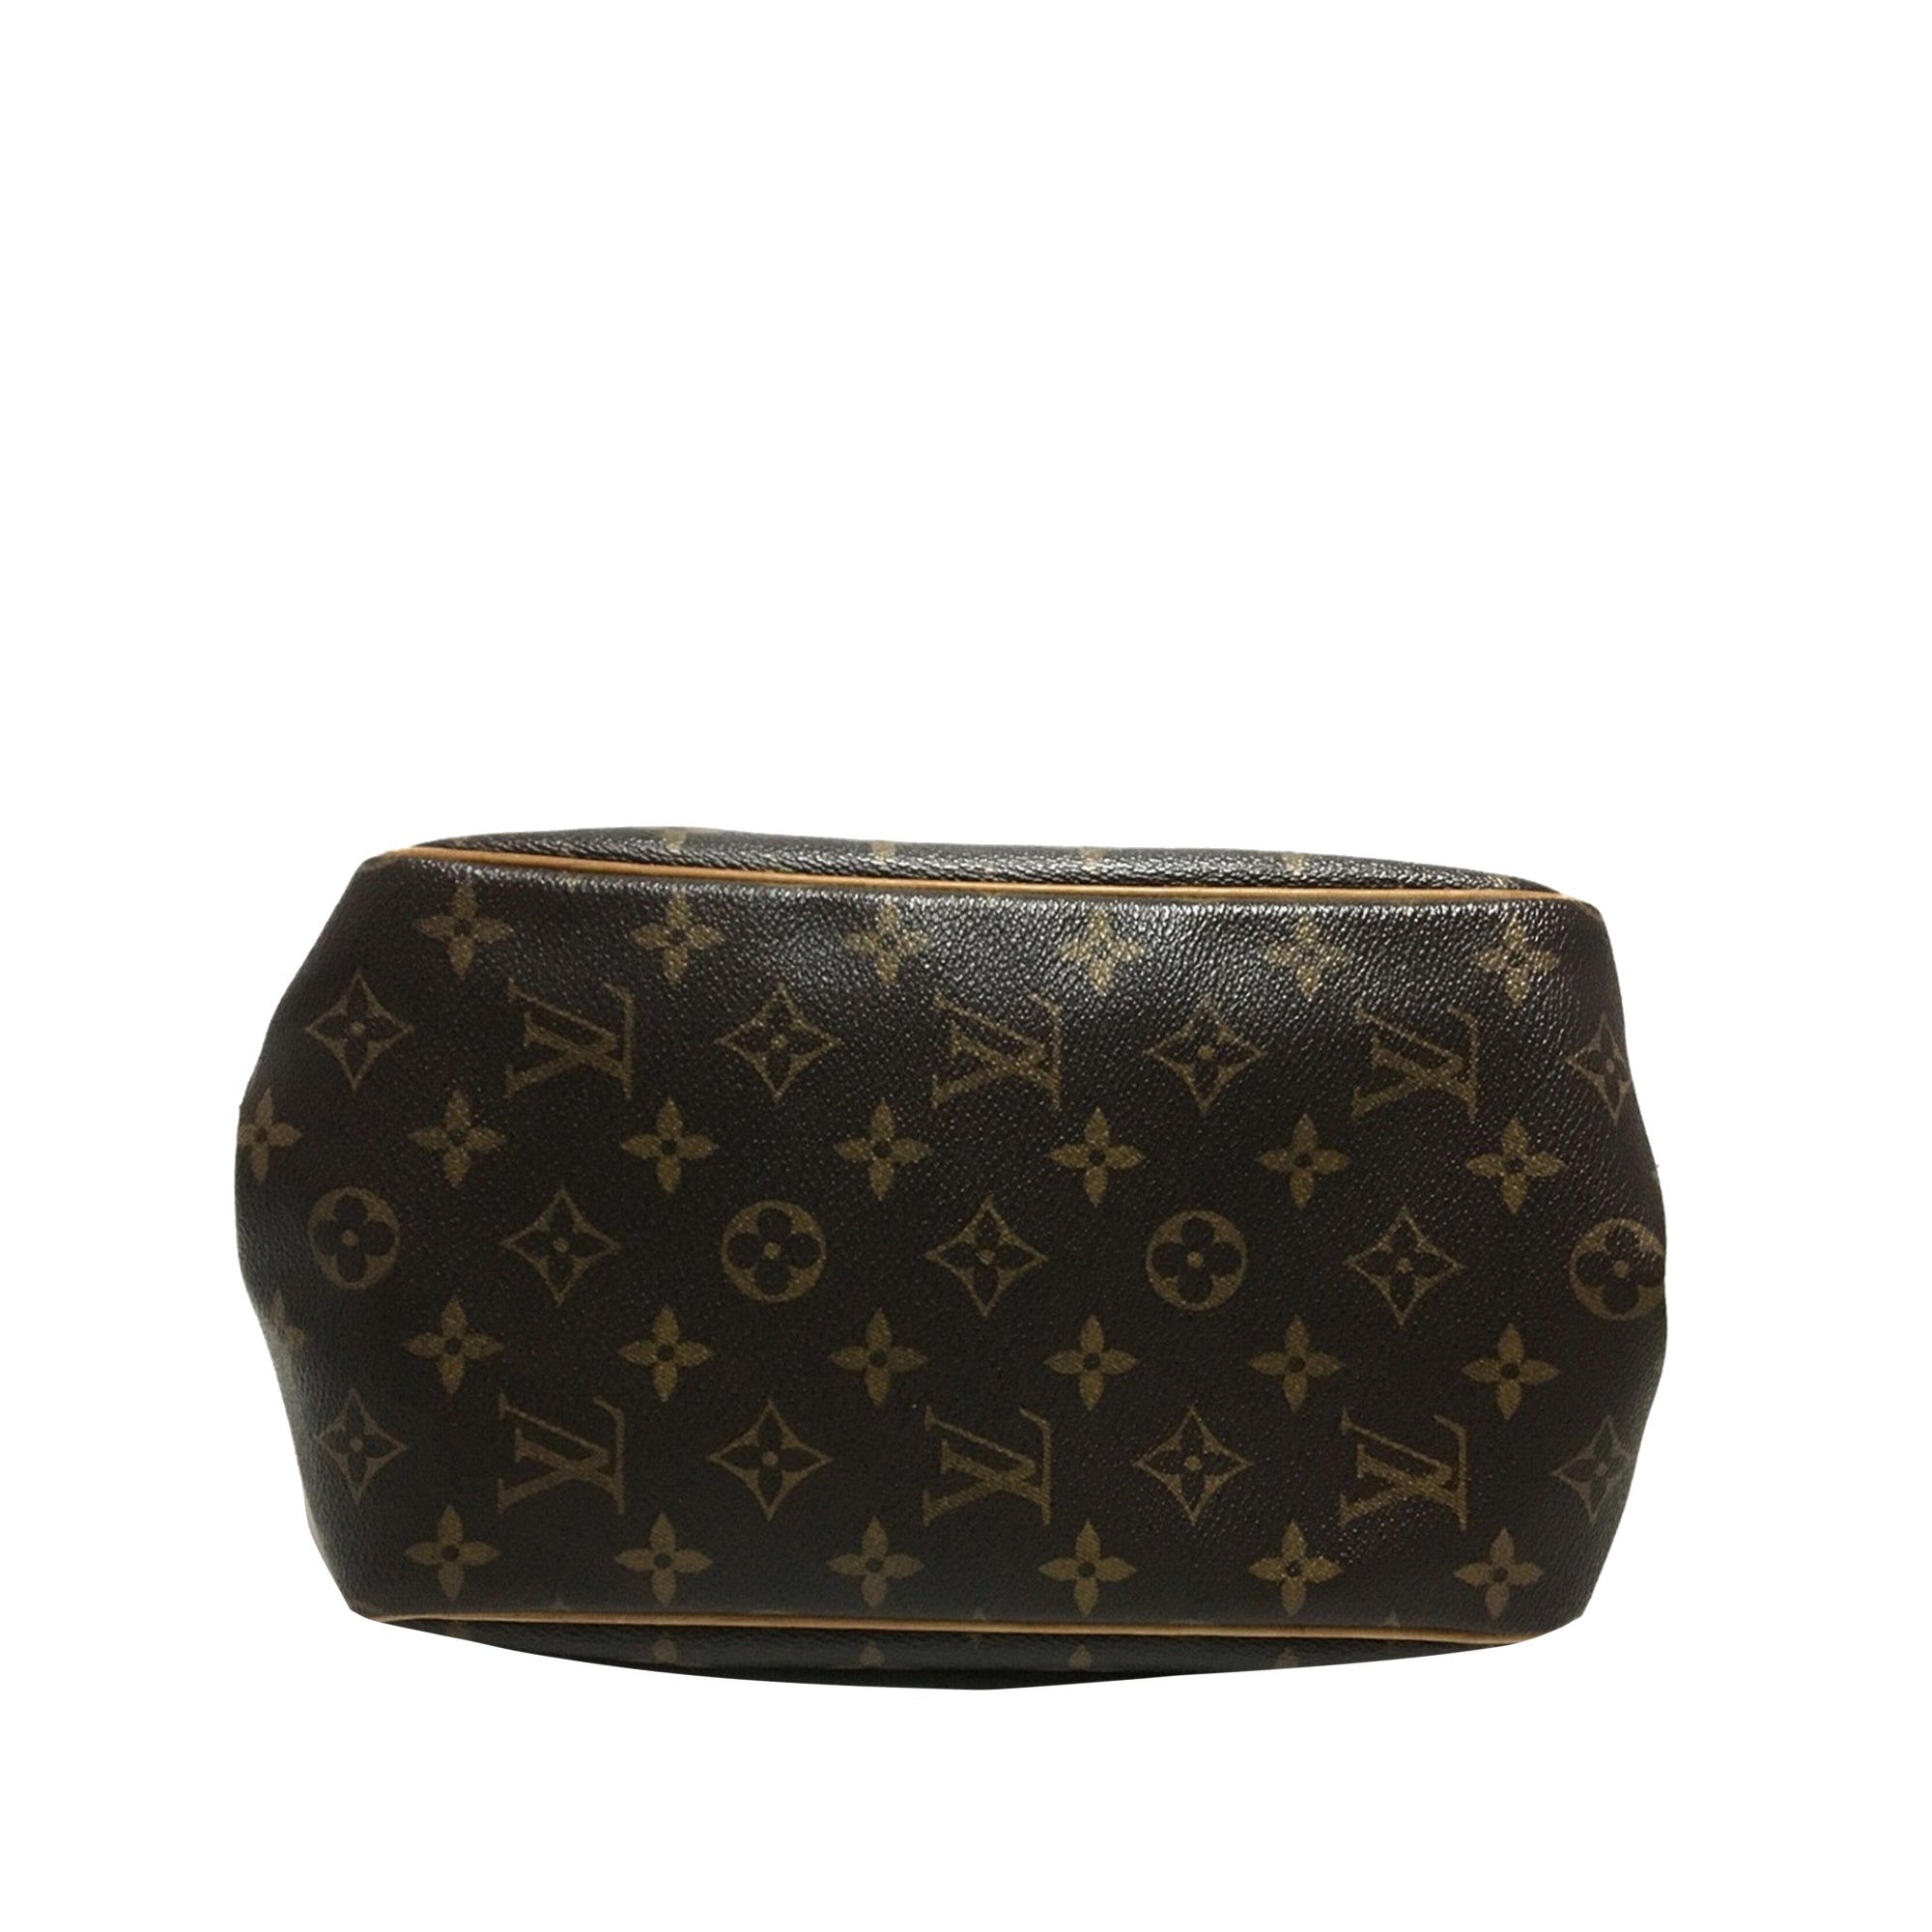 Shop for Louis Vuitton Monogram Canvas Leather Batignolles Vertical PM Bag  - Shipped from USA